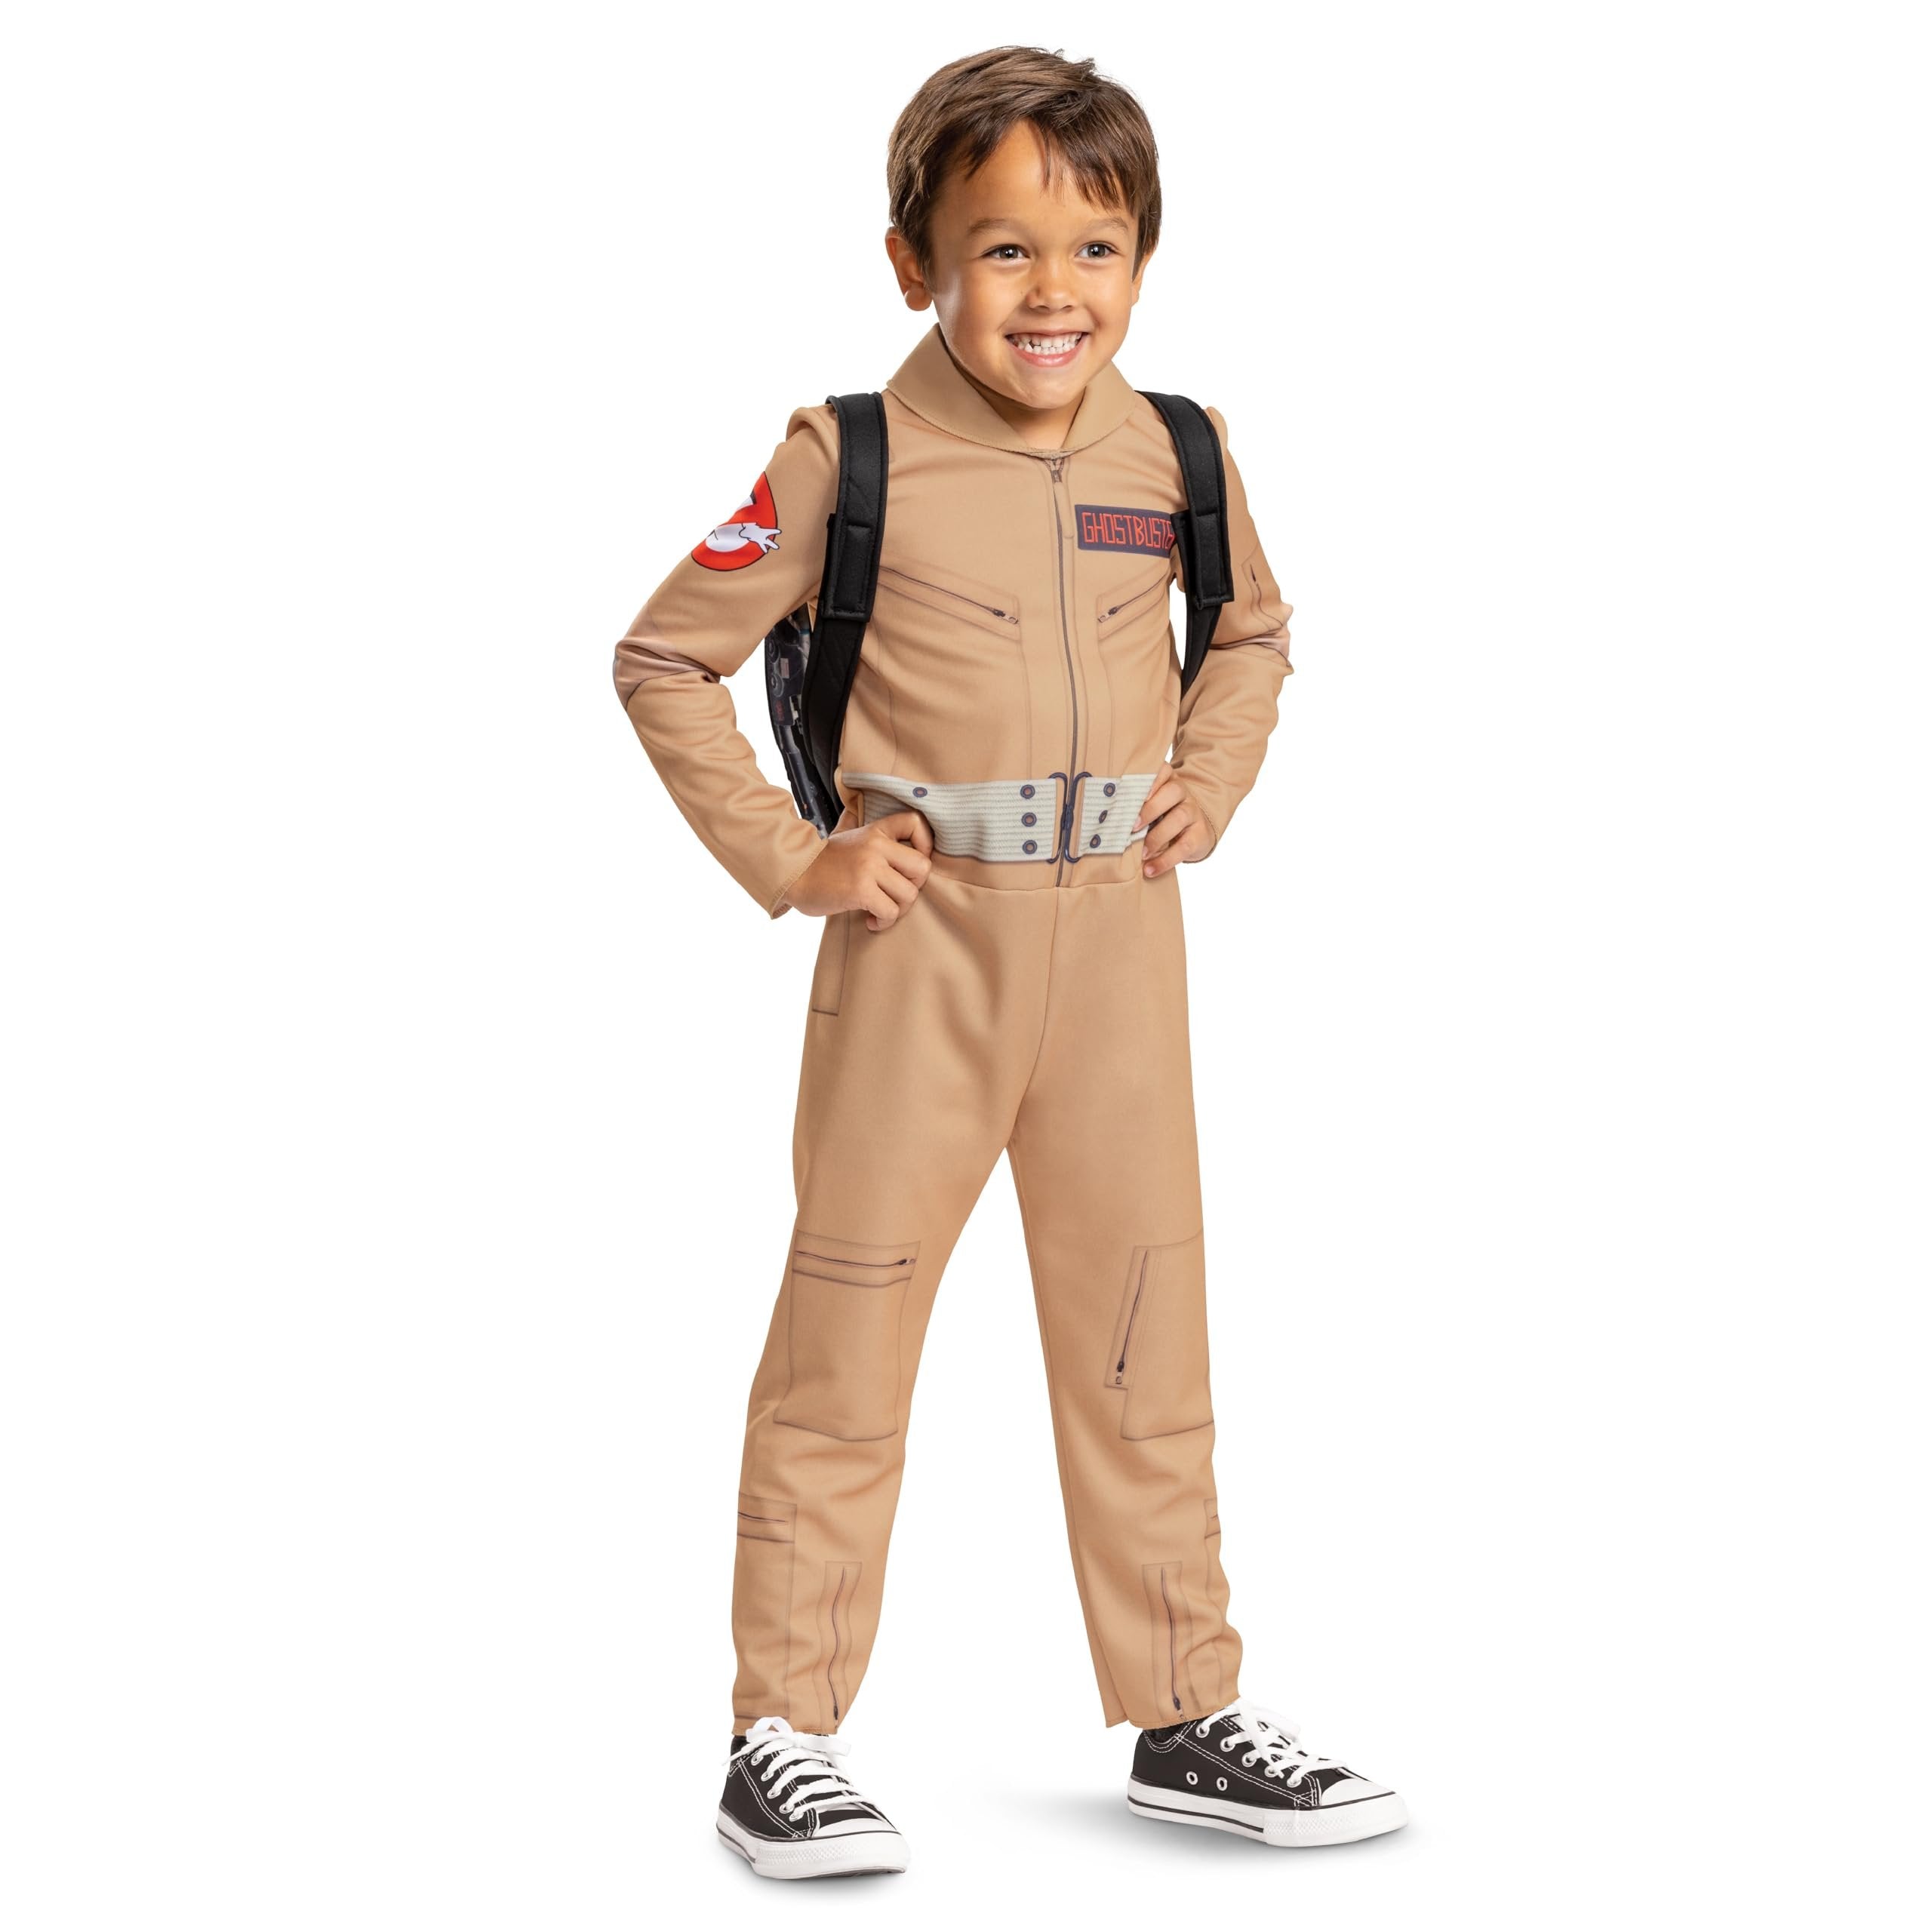 Disguise Ghostbusters Costume for Kids, Official Ghostbusters Classic Jumpsuit with Proton Pack Accessory, Toddler Size Medium (3T-4T)